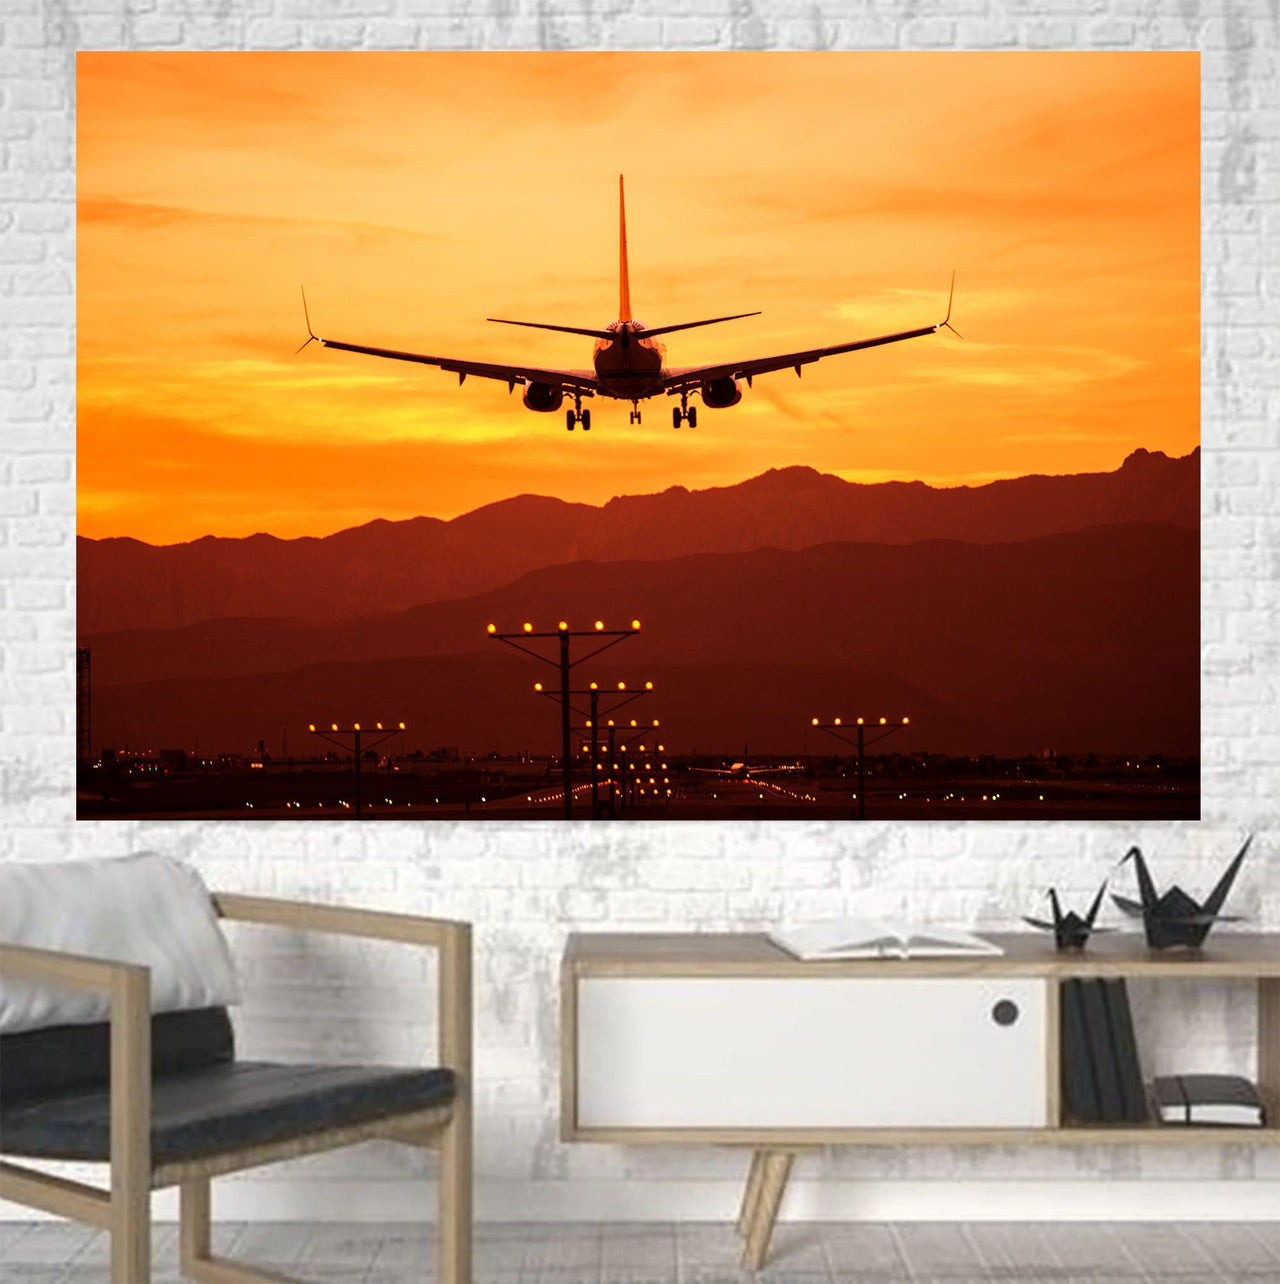 Landing Aircraft During Sunset Printed Canvas Posters (1 Piece) Aviation Shop 